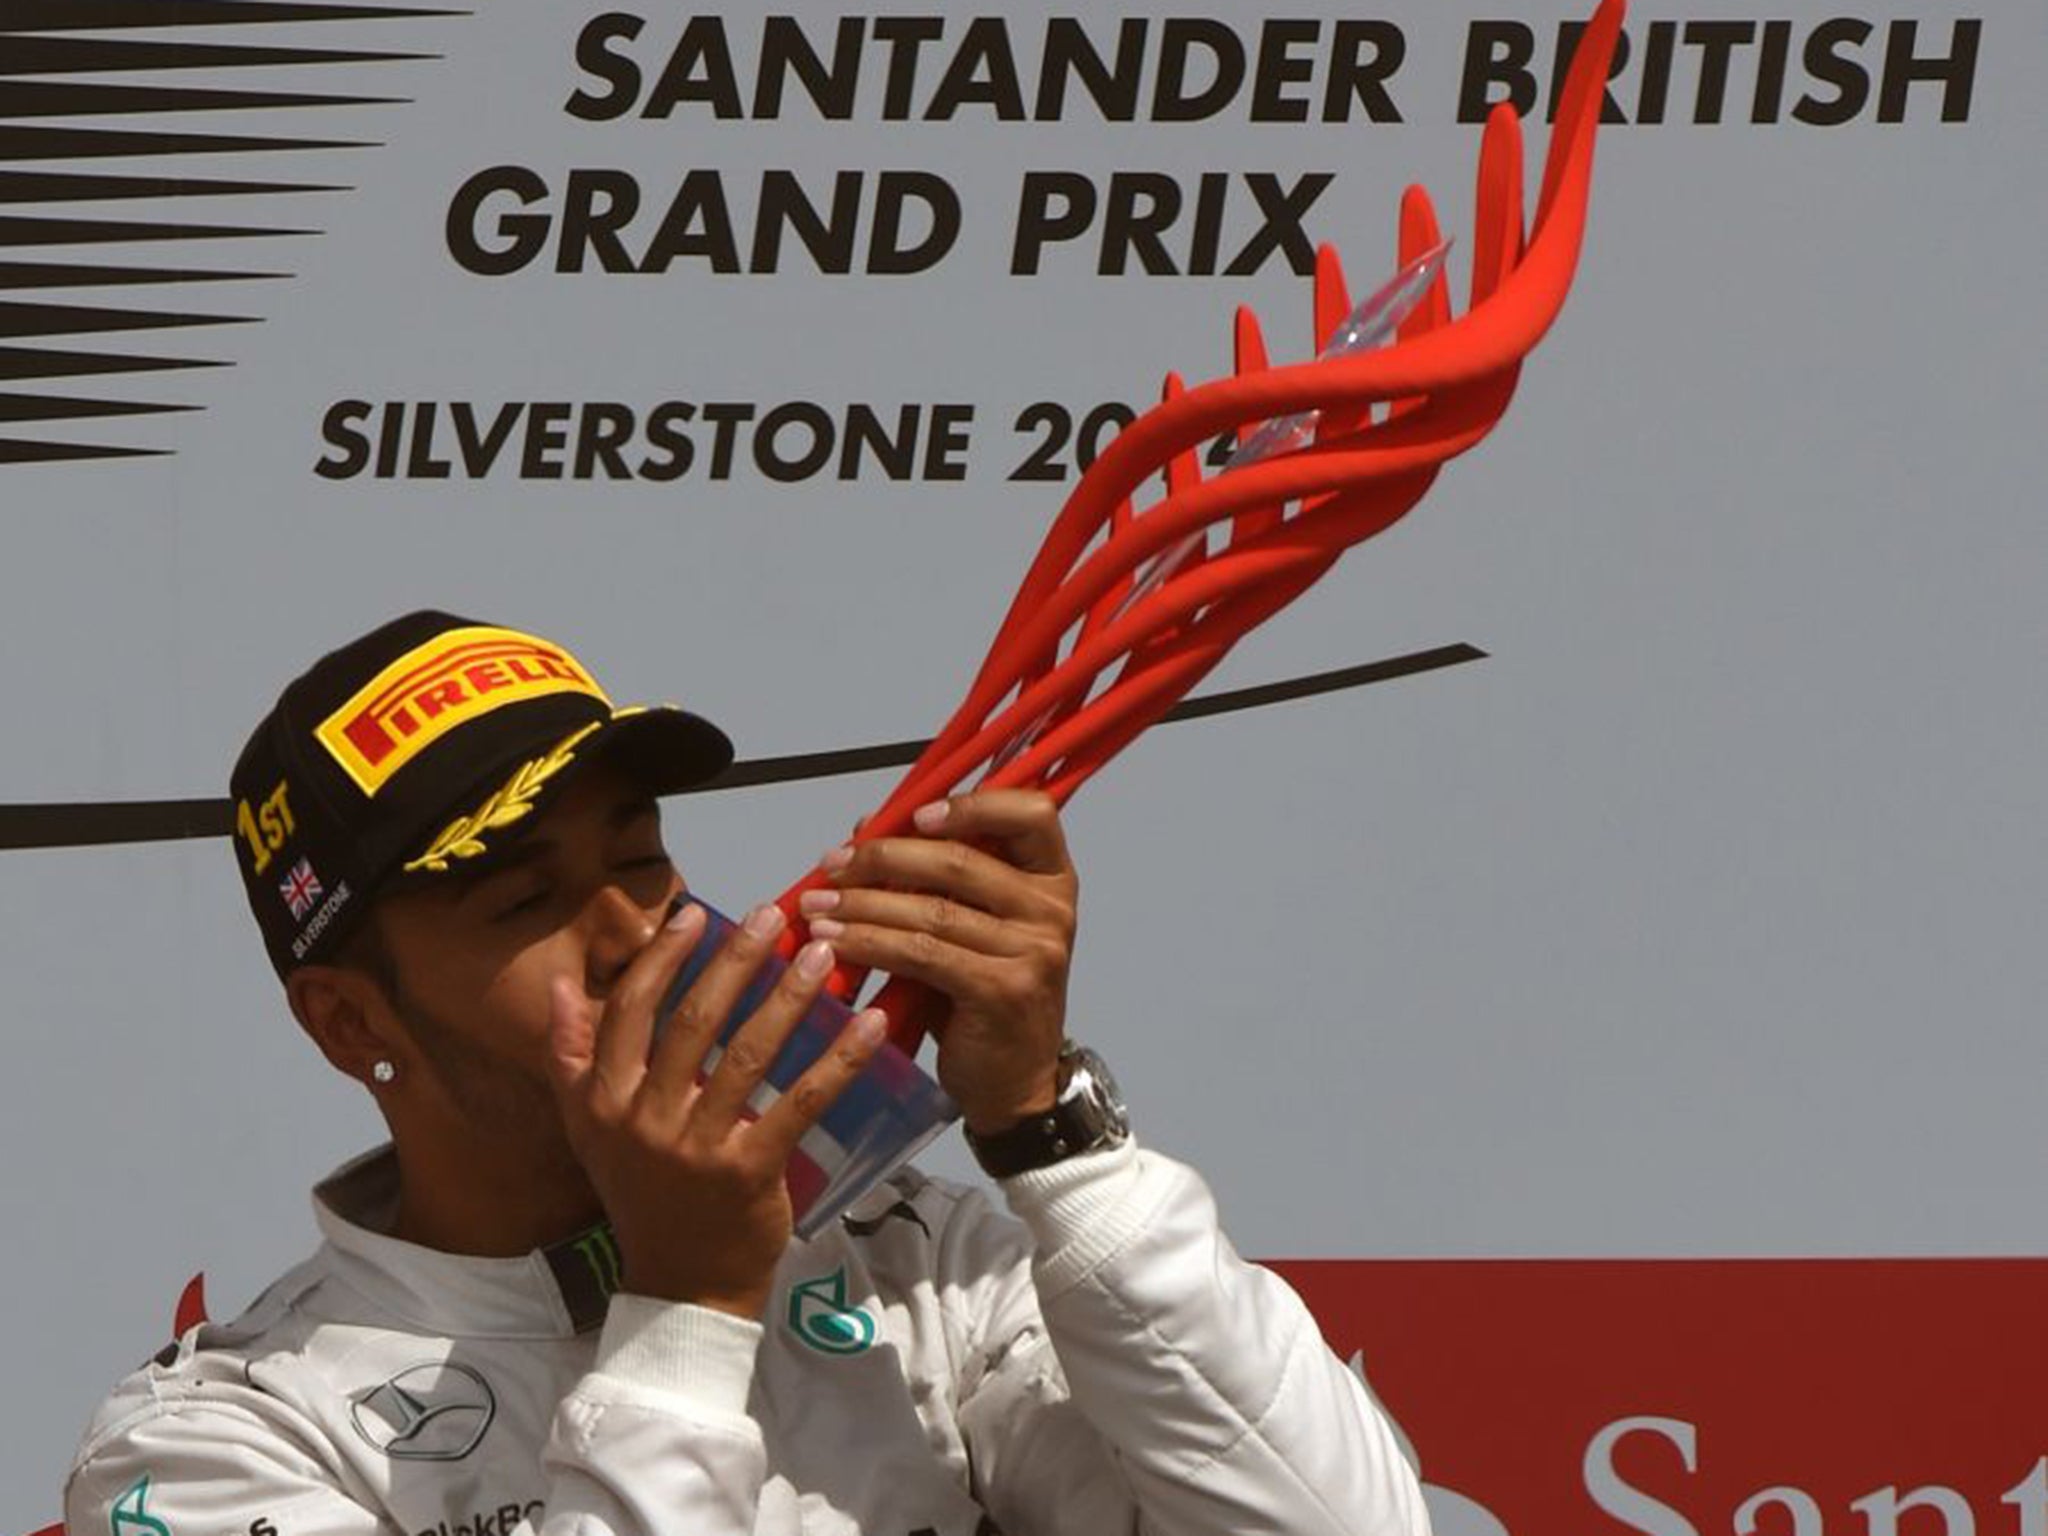 Lewis Hamilton with the Santander trophy after winning last year’s British Grand Prix